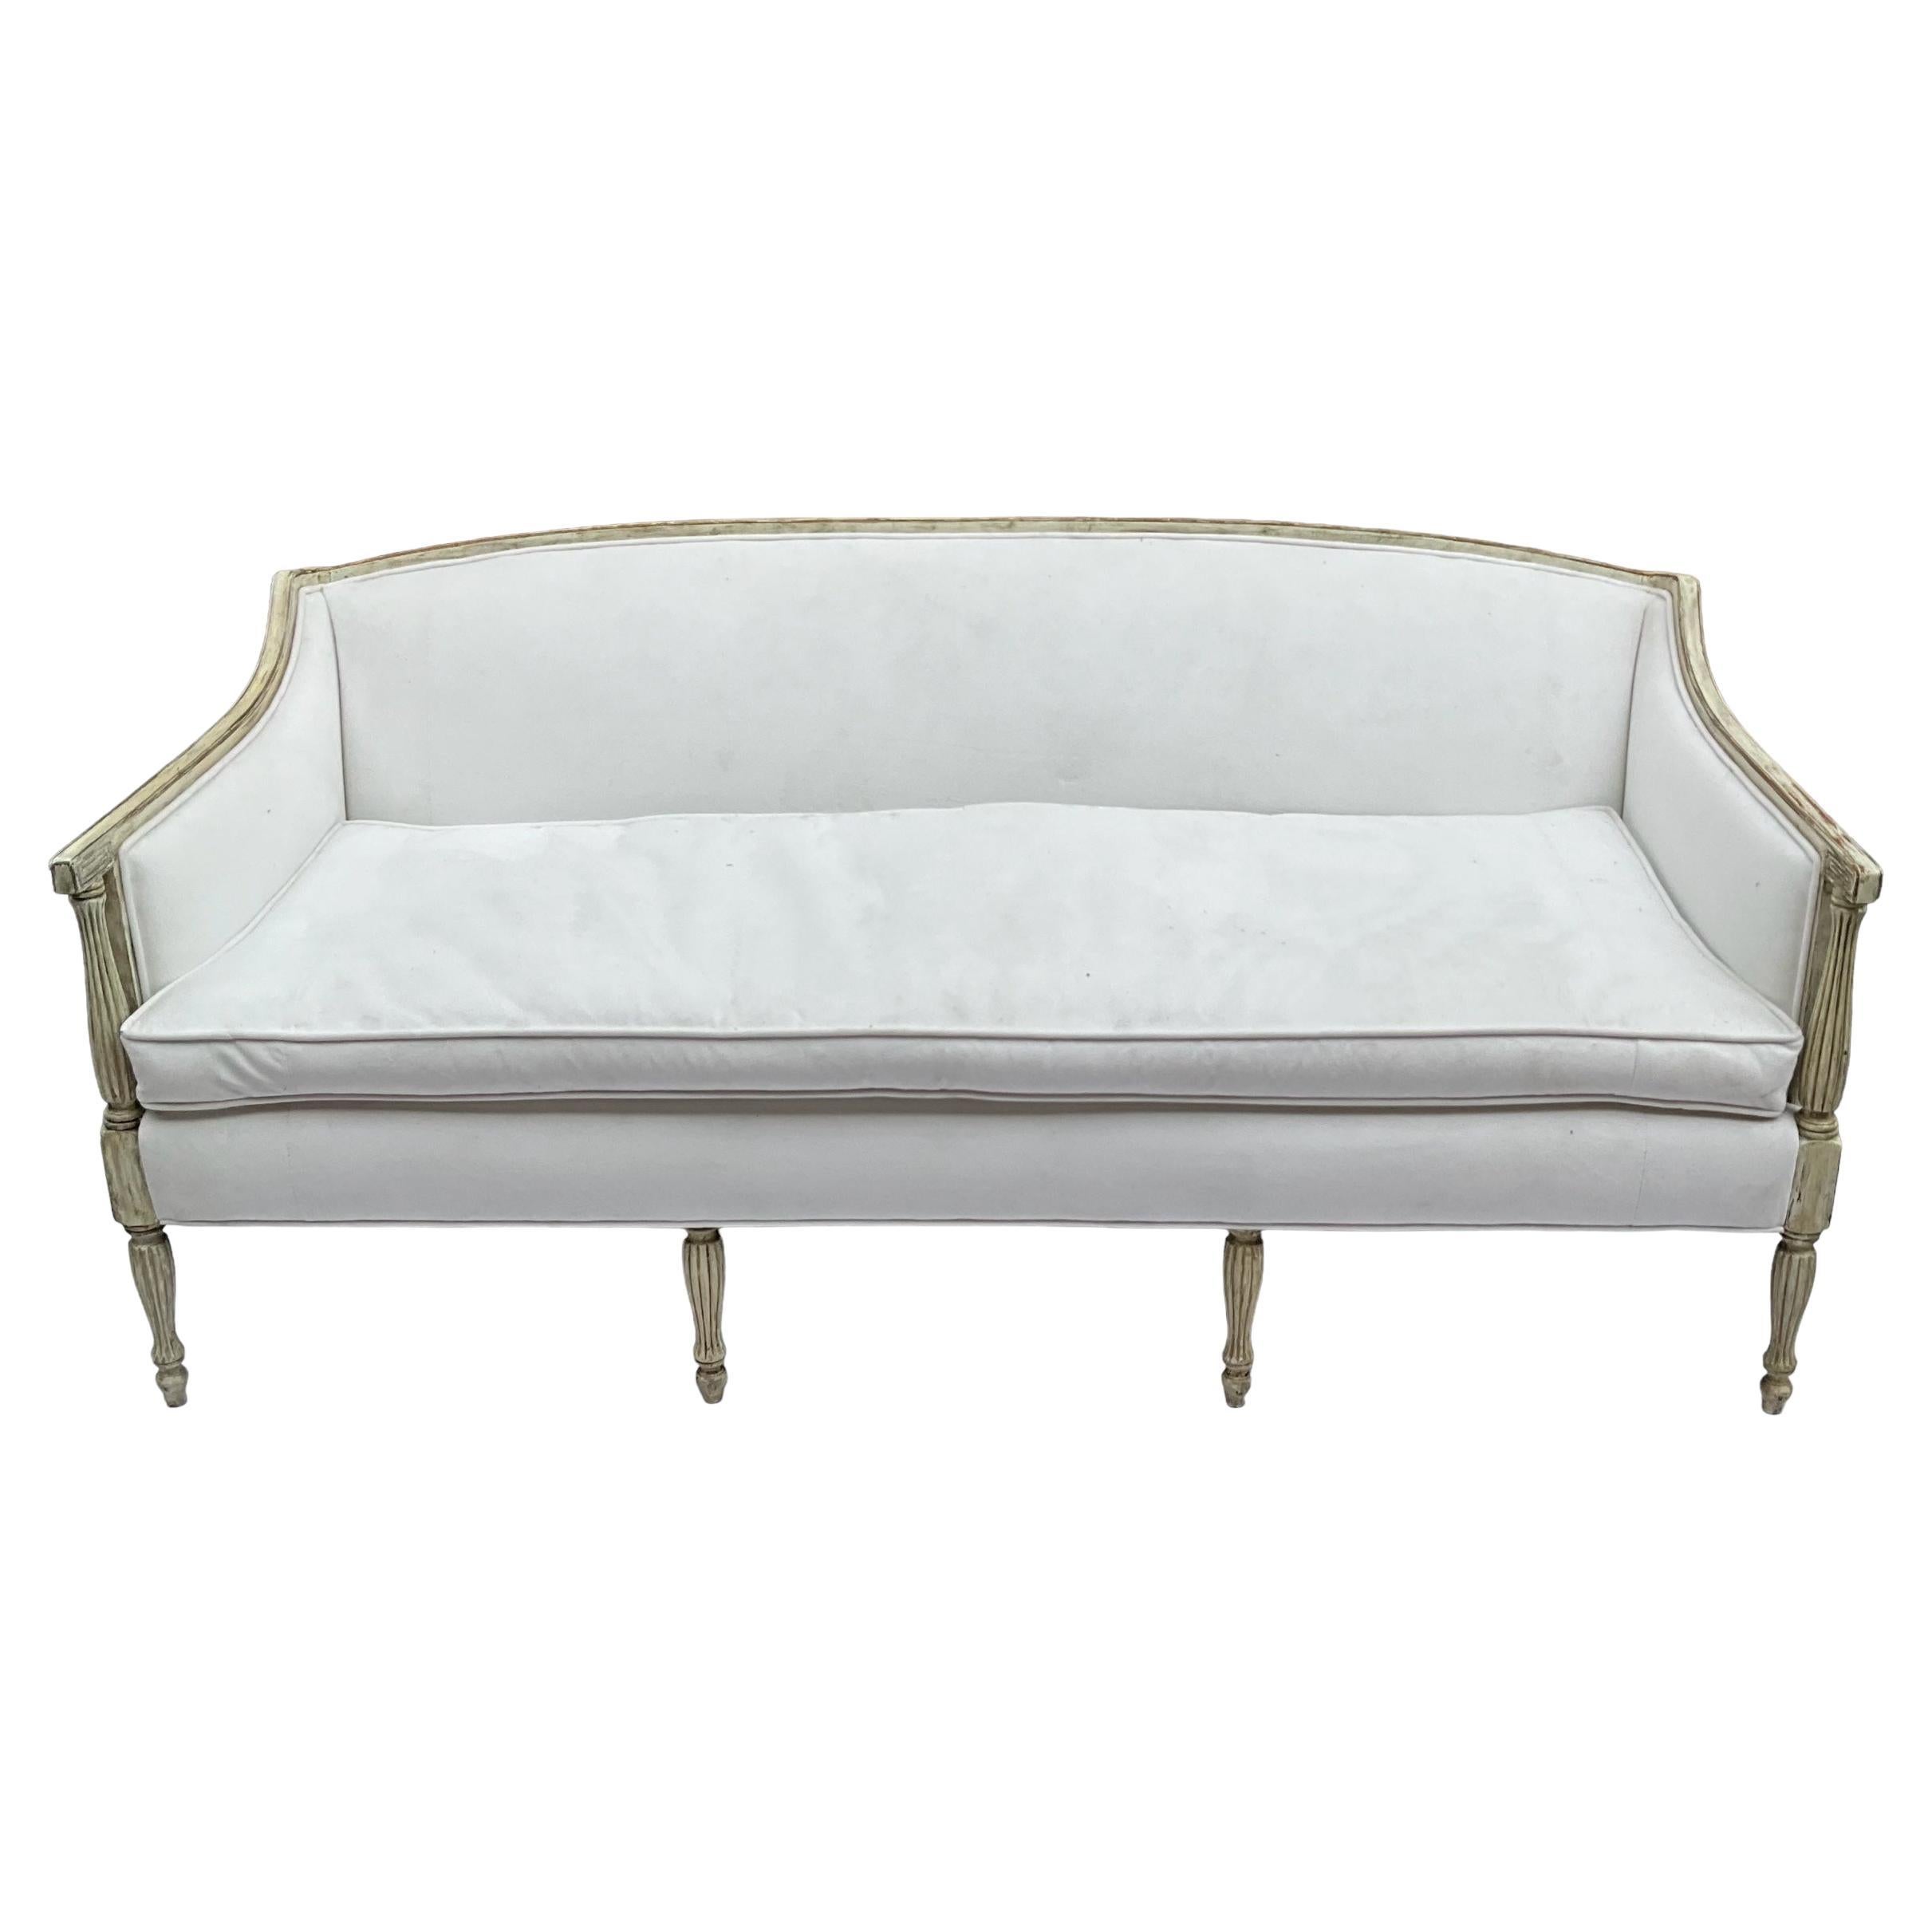 Early 20th-C. Federal Style Sofa W/ Painted Gustavian Finish & White Upholstery 